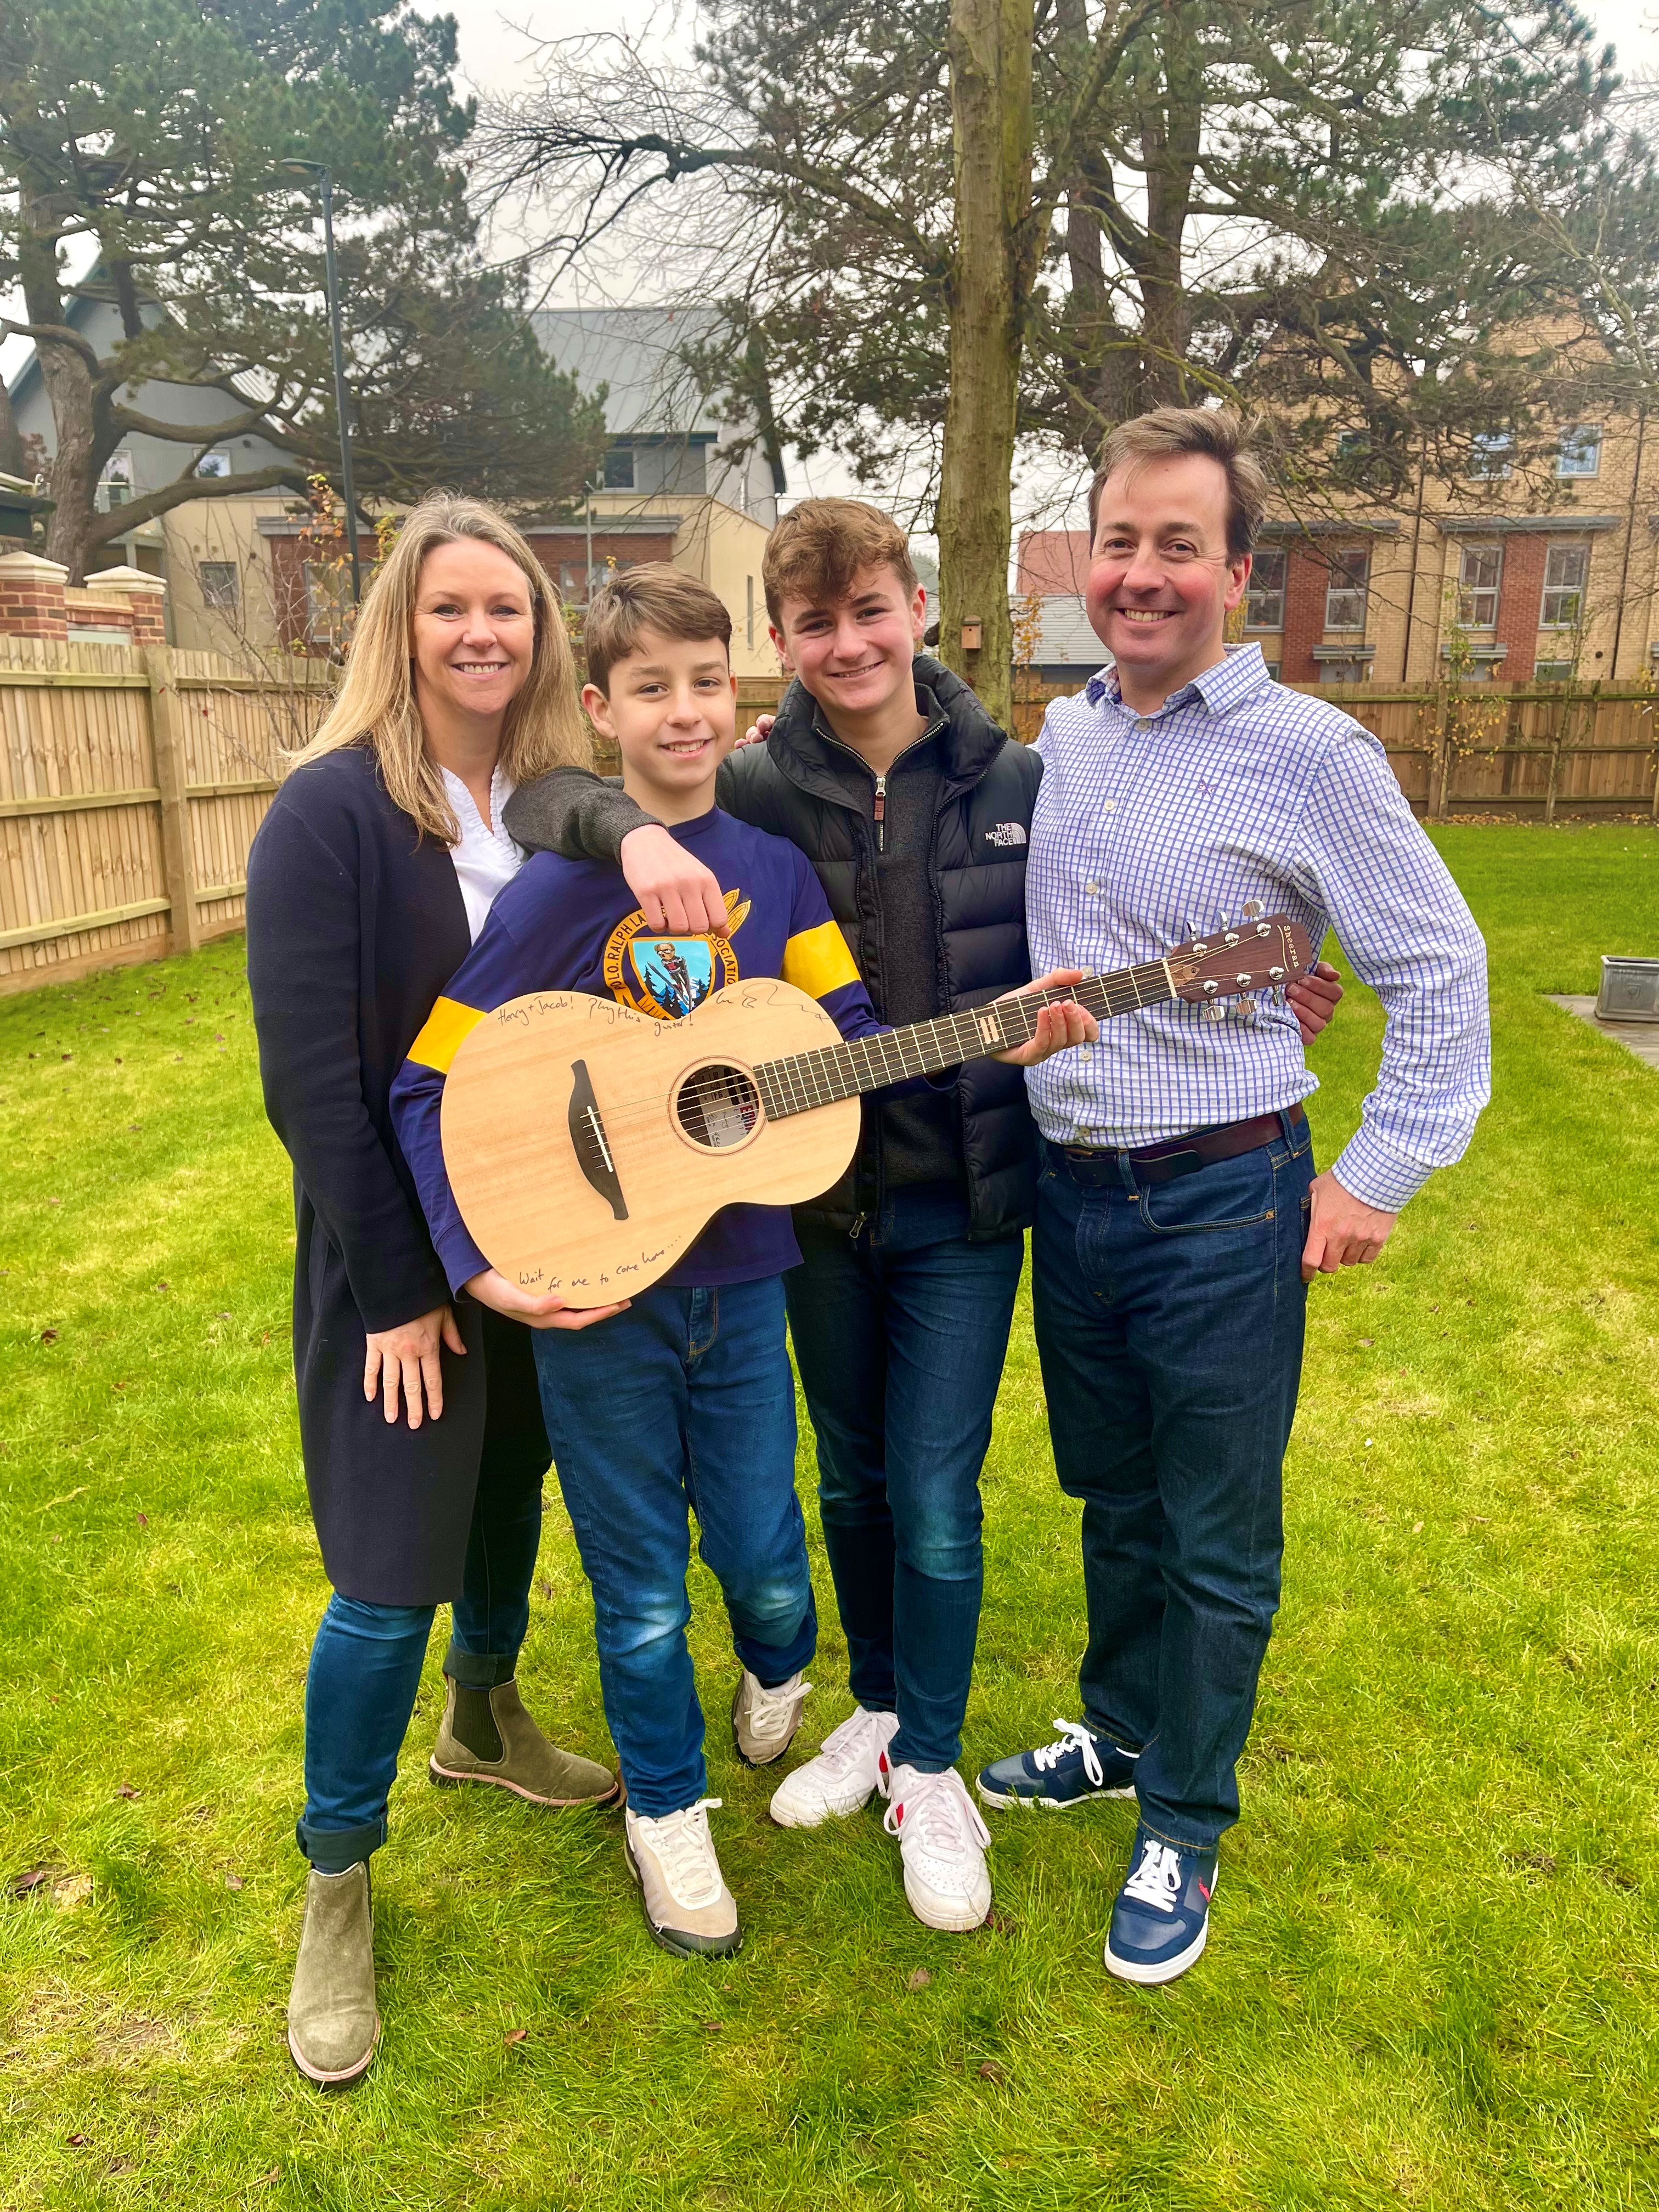 Hospital worker Kellie Myers and her family with Ed Sheeran's prototype guitar, that they won through a charity raffle. (GeeWizz/ PA)